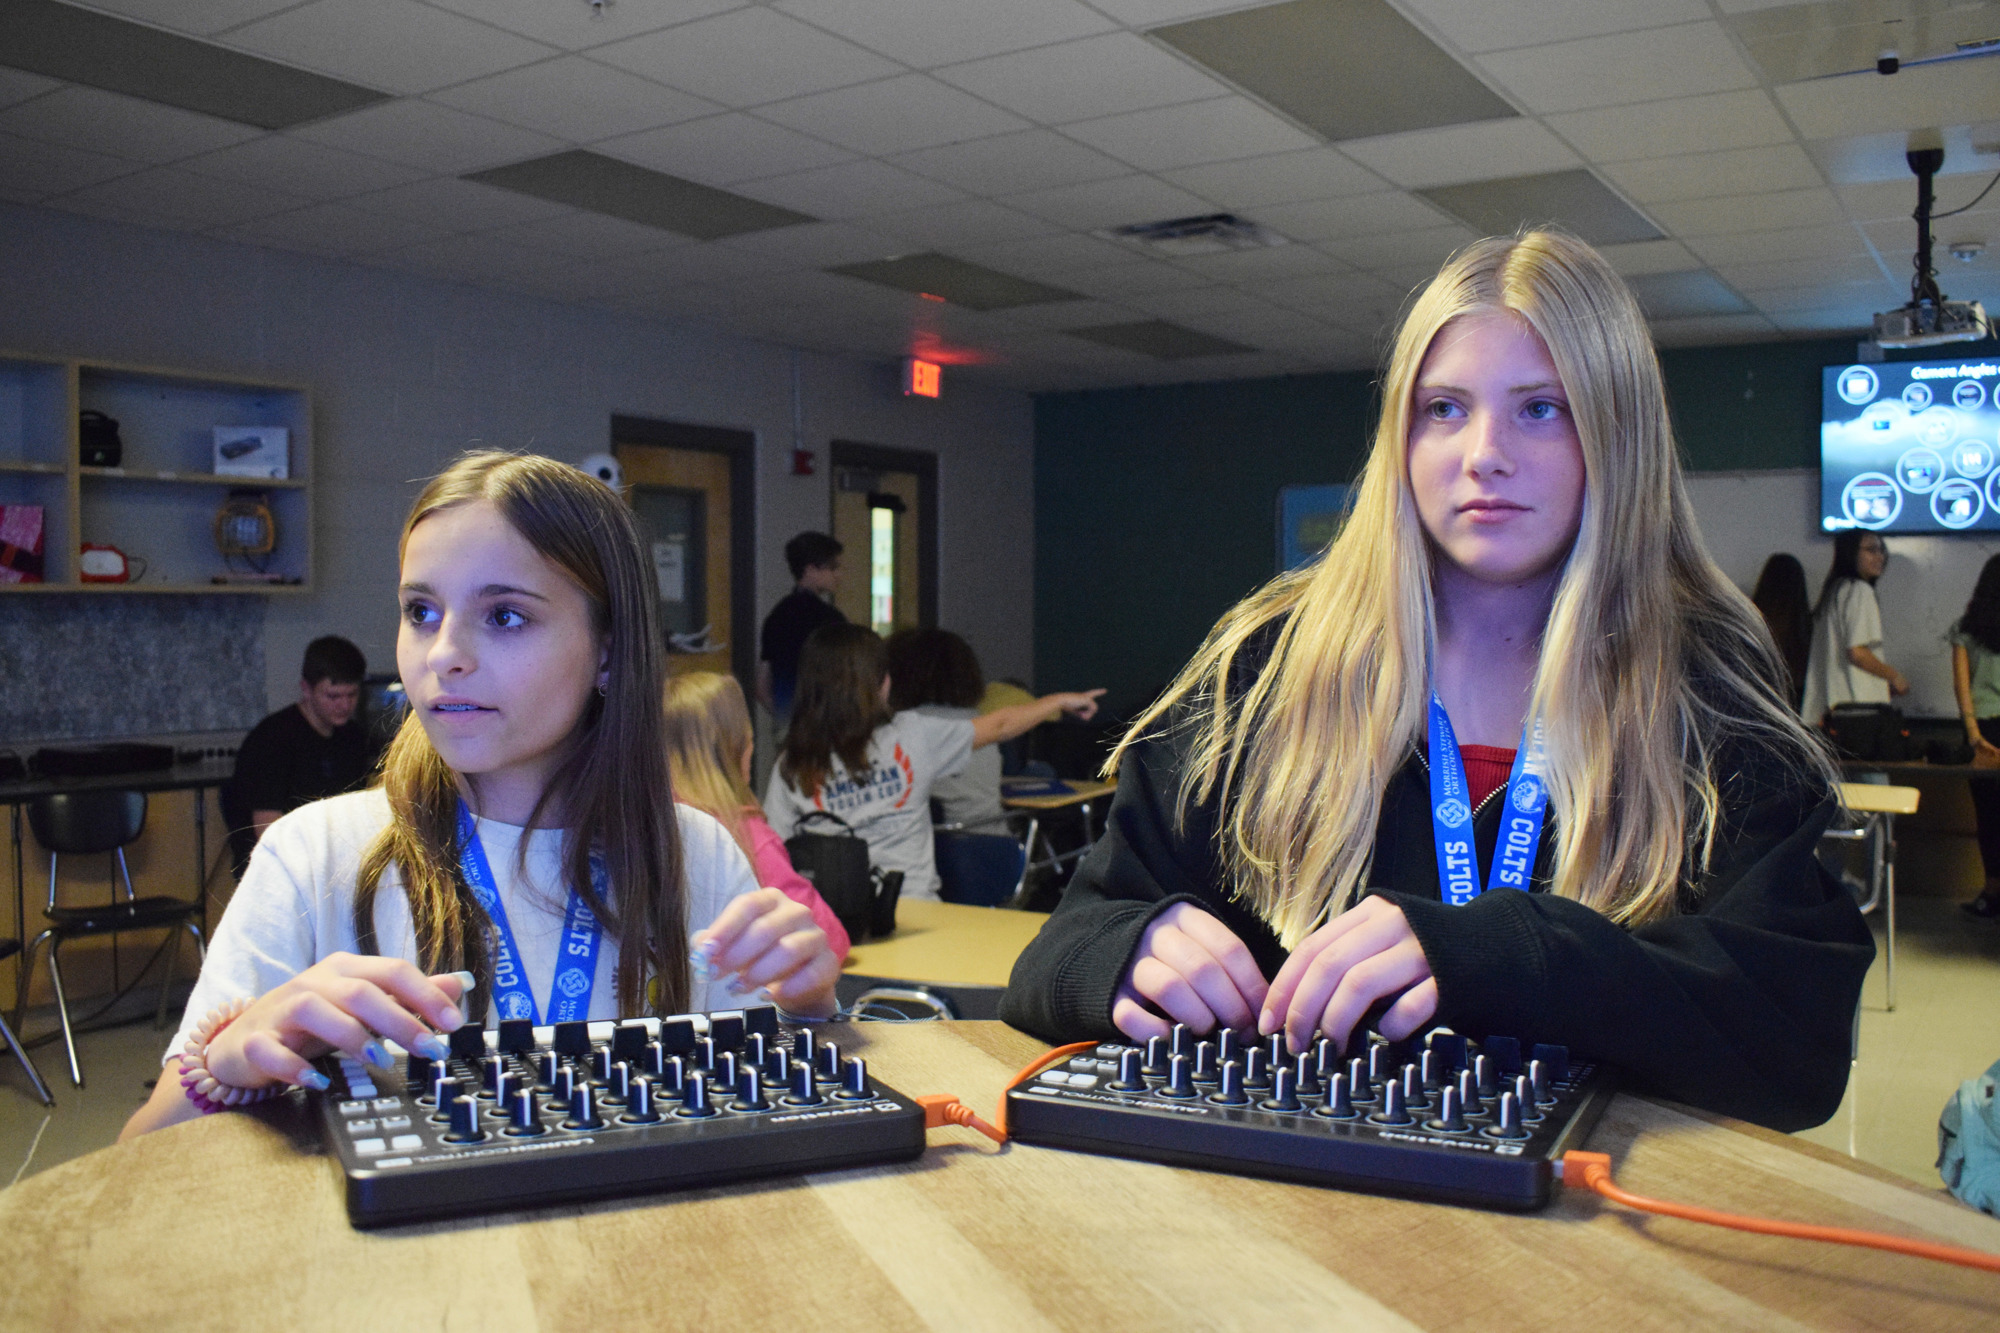 Seventh graders Juliette Aronin and Samantha Gee use switchboards to control the animatronics. (Photo by Liz Ramos)